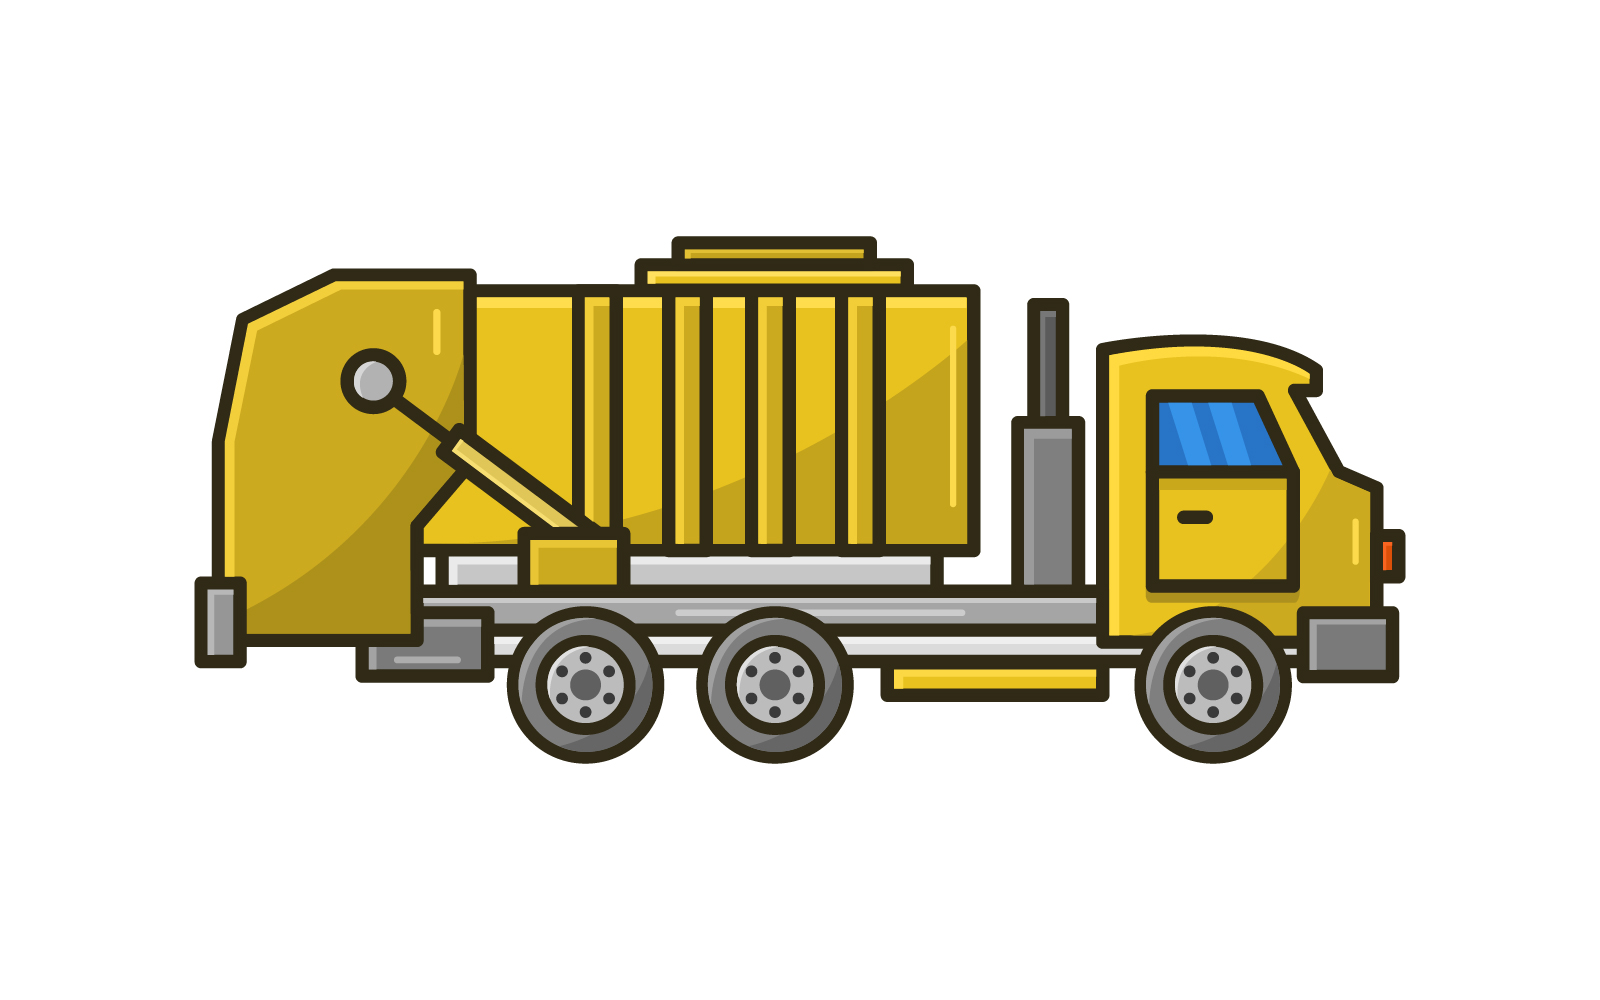 Garbage truck illustrated in vector on a white background